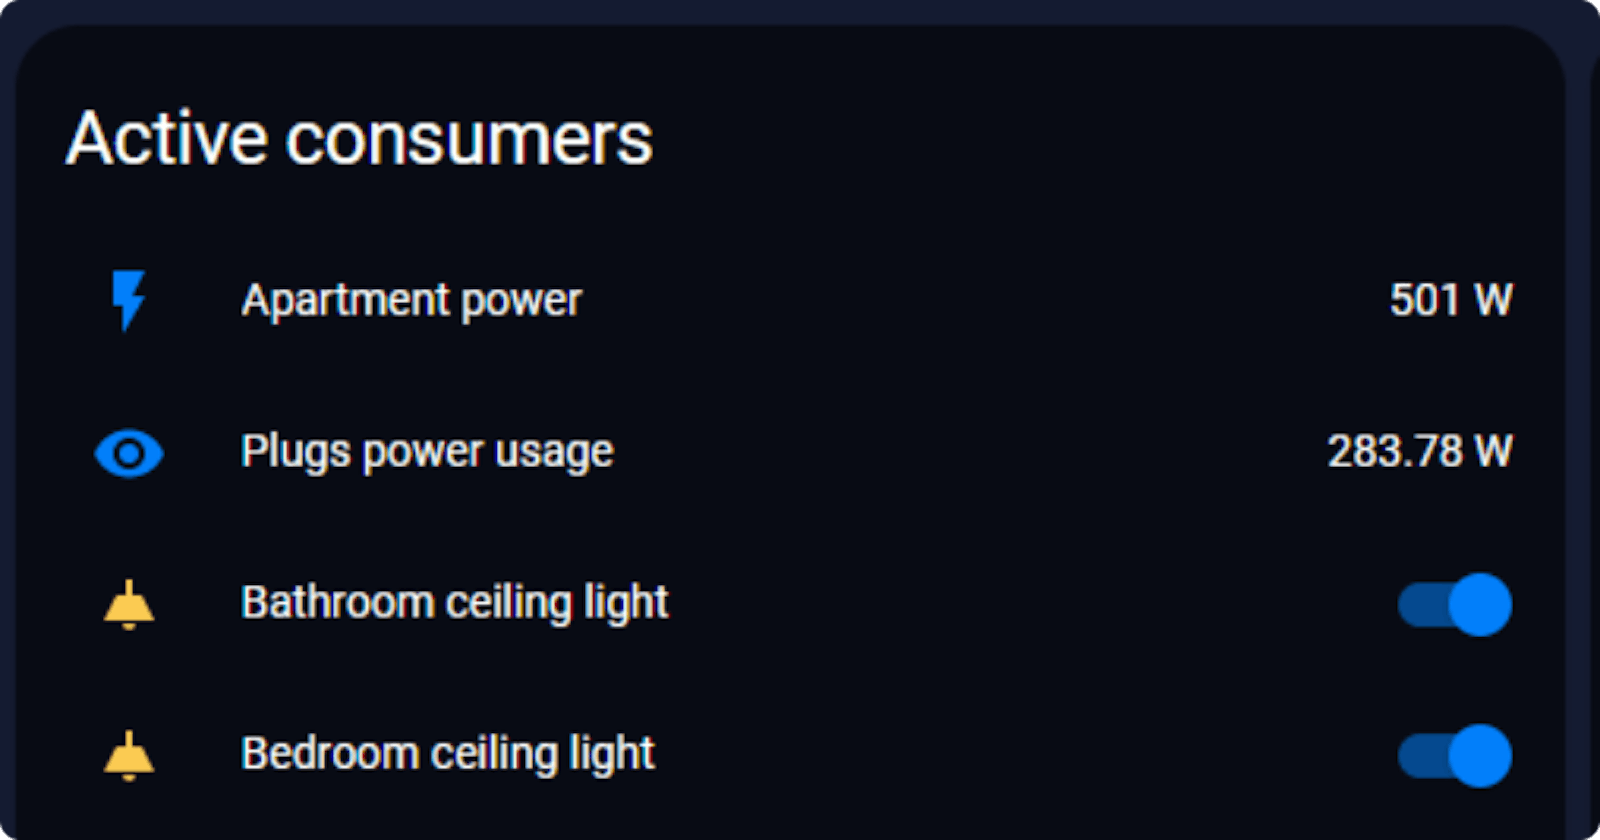 Creating a card for active power consumers